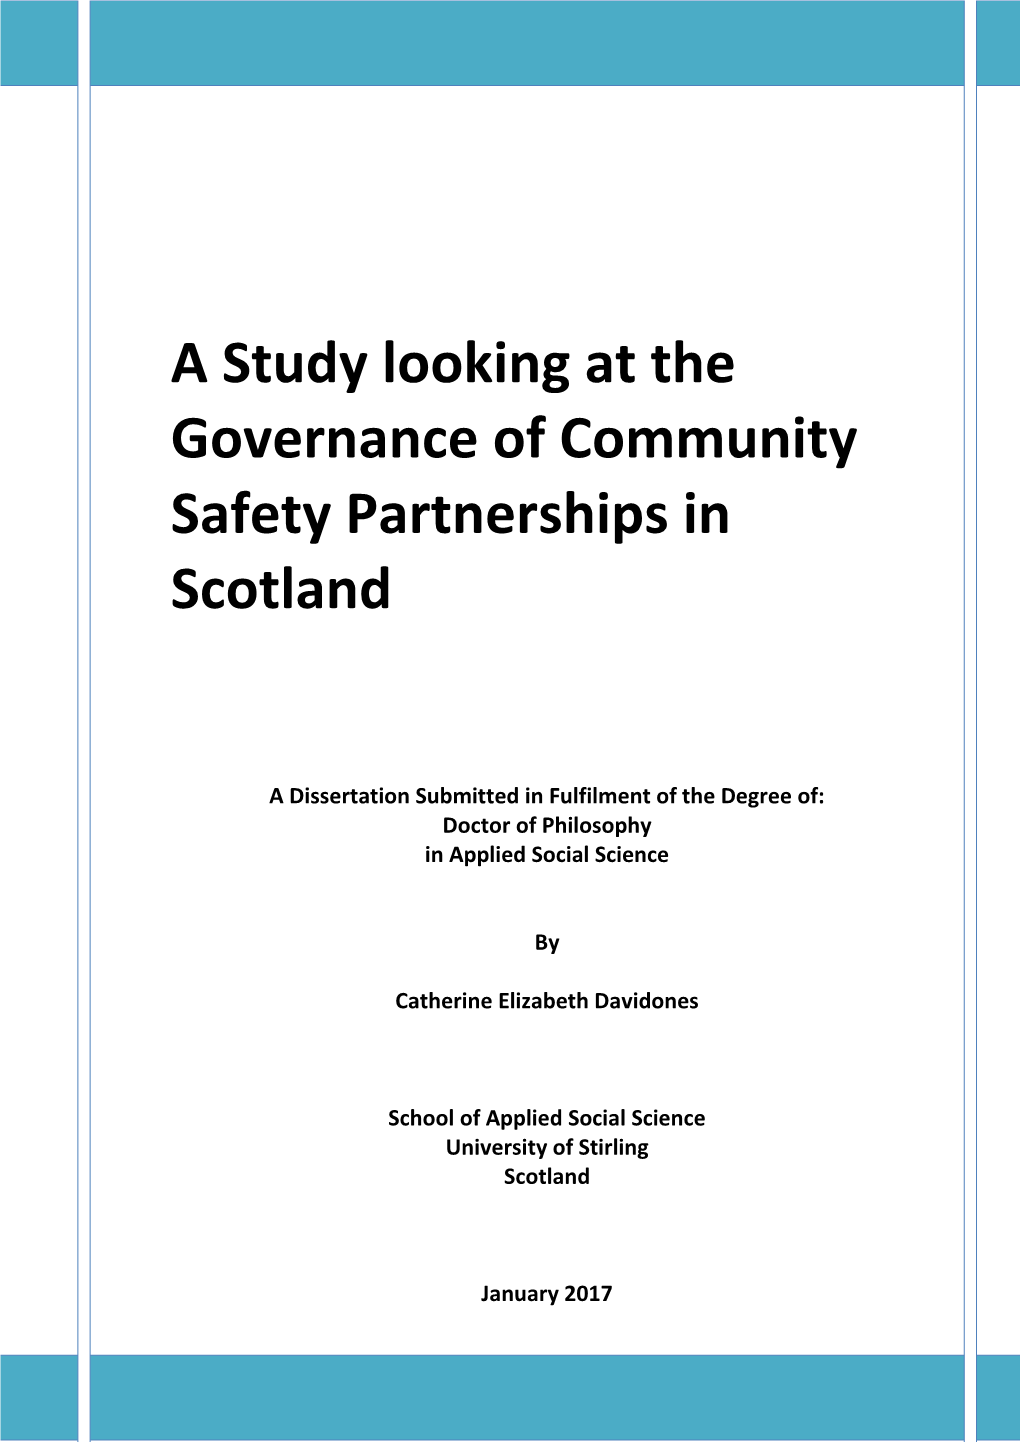 A Study Looking at the Governance of Community Safety Partnerships in Scotland